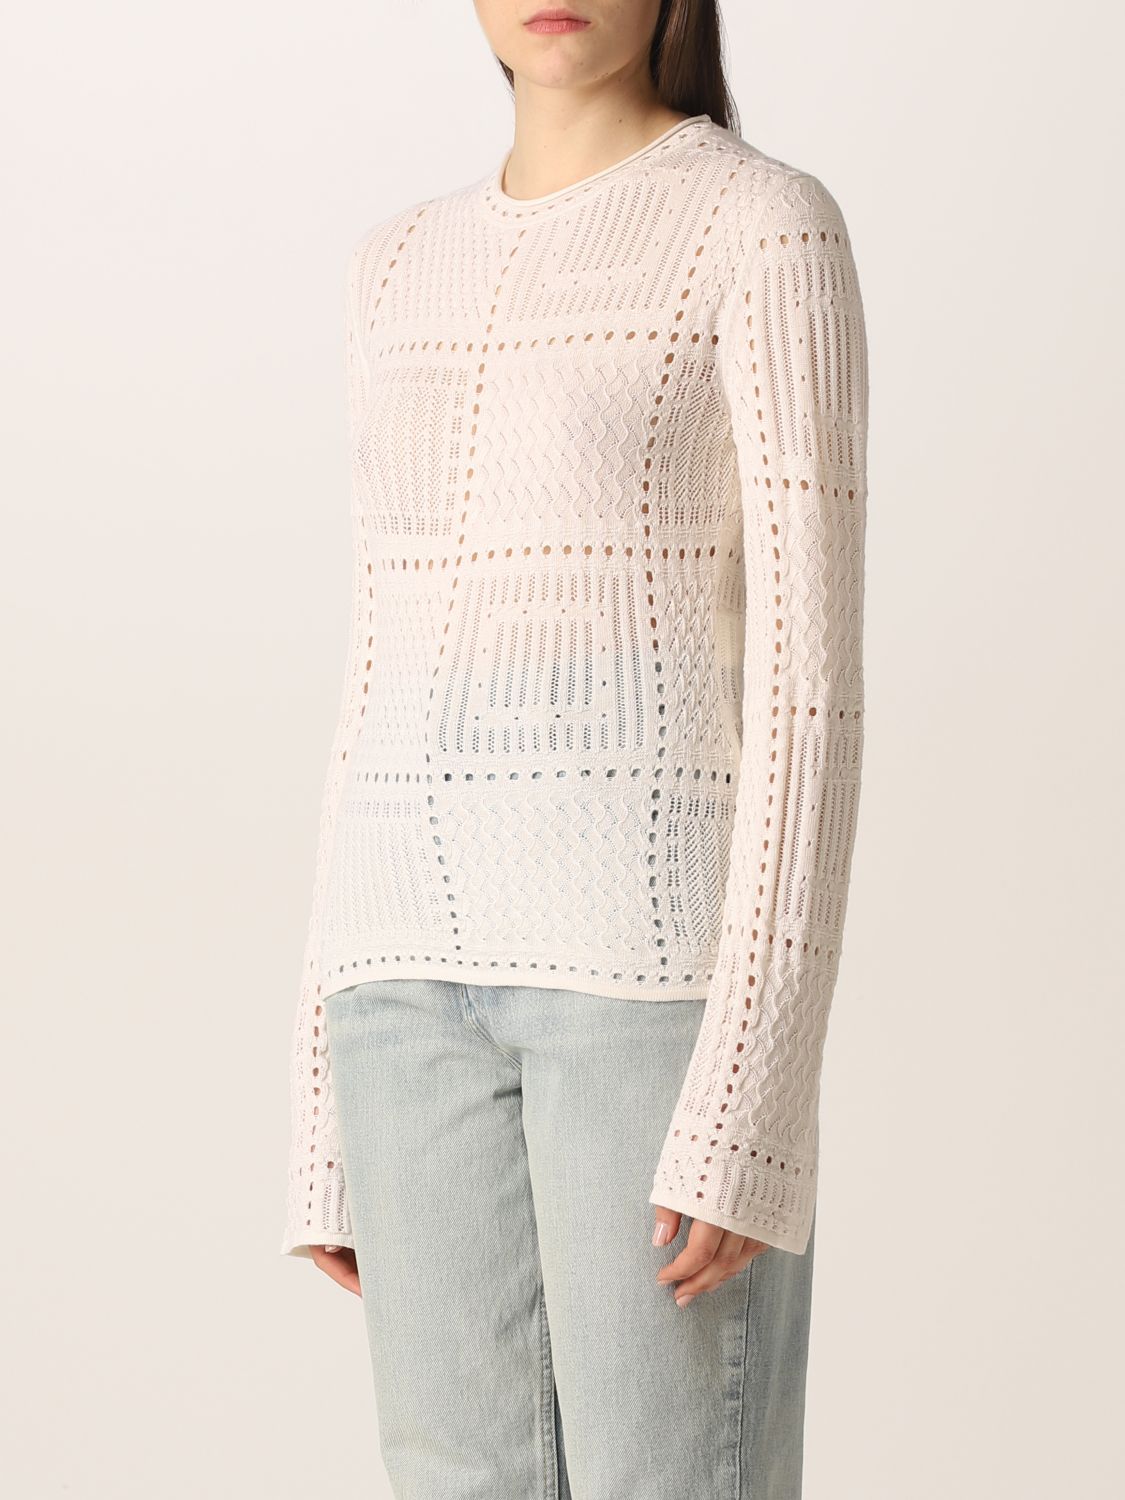 CHLOÉ: perforated wool and cashmere sweater - White | Chloé sweater ...